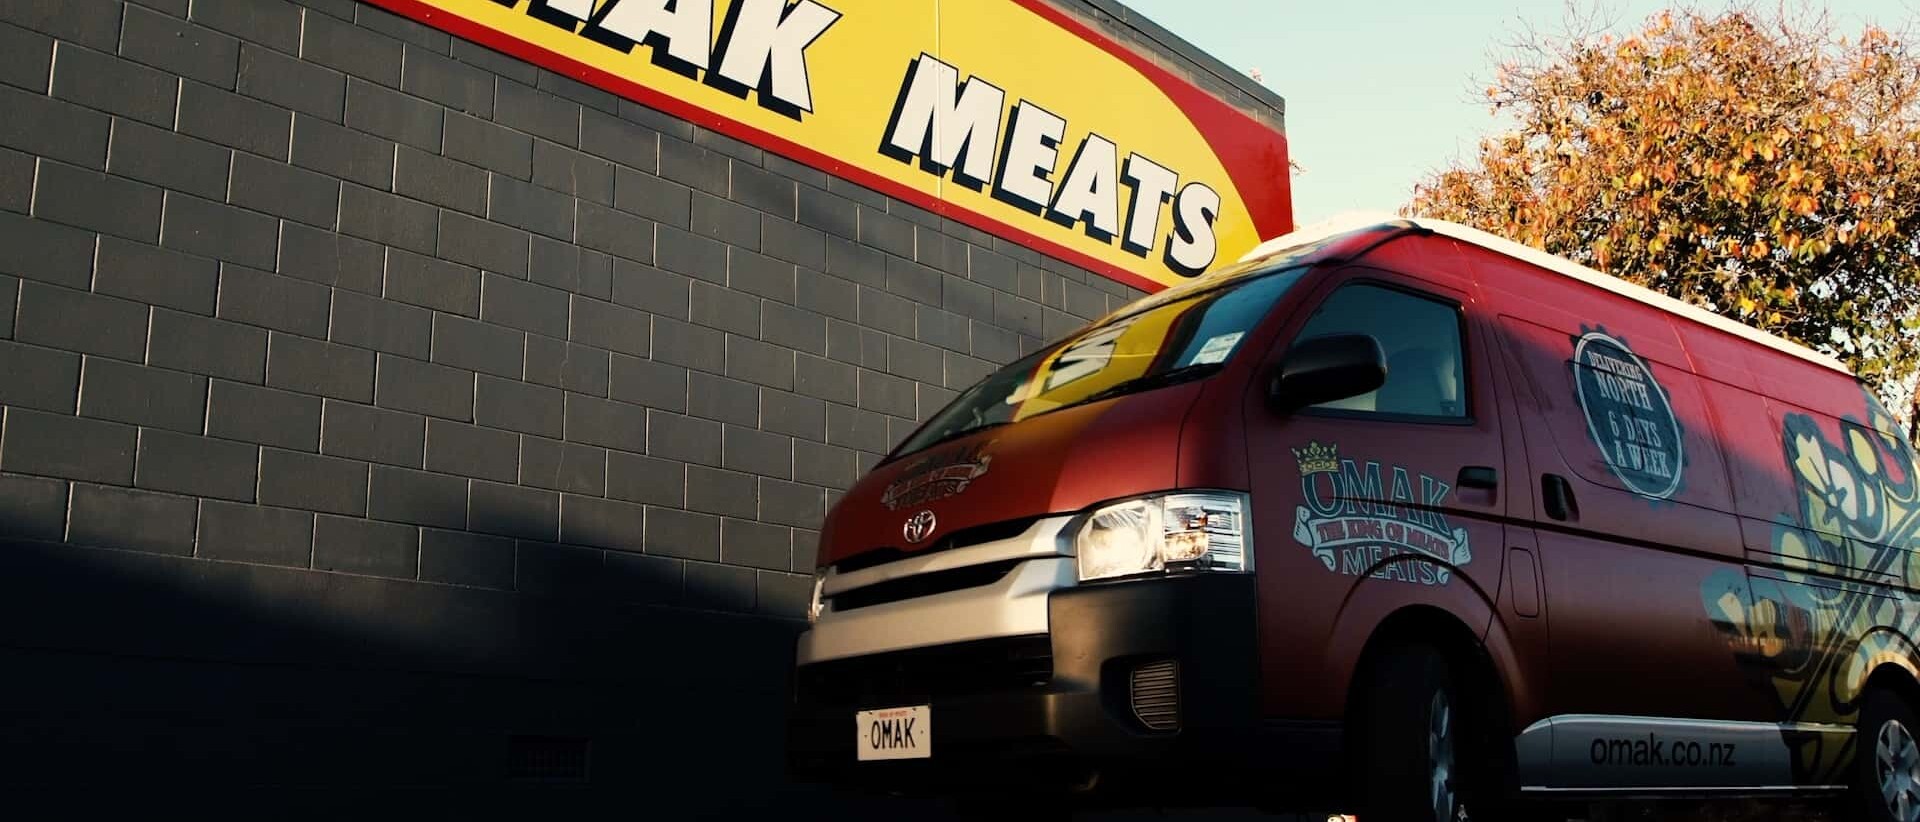 Omak Meats delivery vehicle